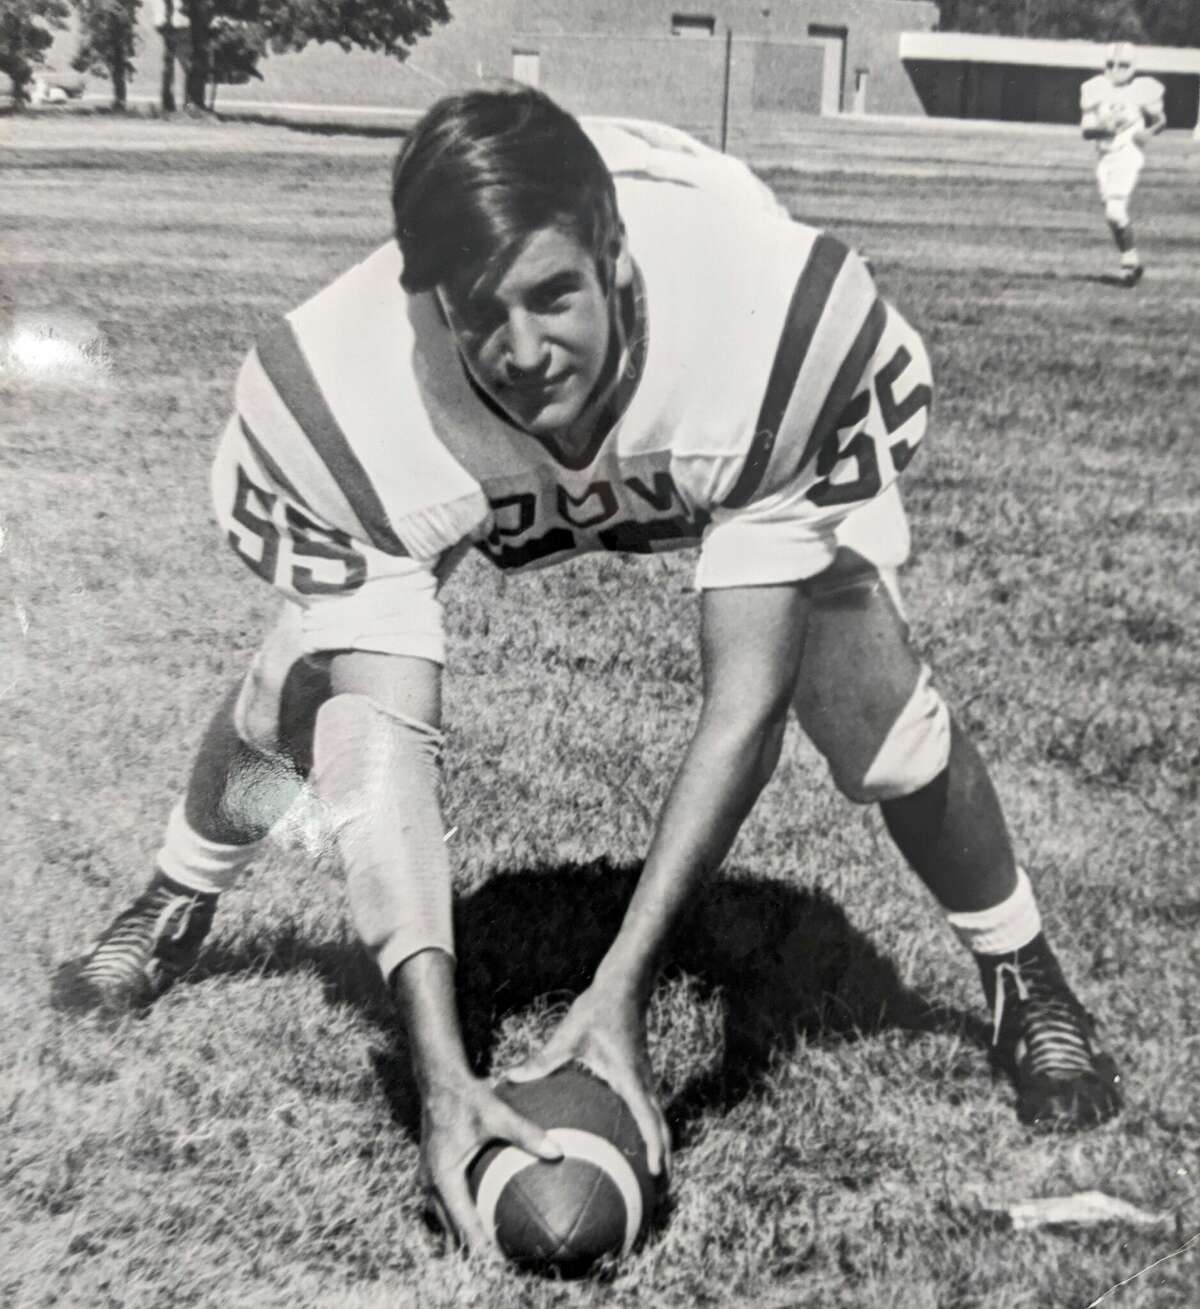 This is Mike Hoy on the football field at Dow High School around 1970. Athletic. In good health. On Senior Skip Day on May 28, 1971, Mike went waterskiing at Wixom Lake with friends. A week later, he would have his graduation ceremony, and that fall he planned to attend Northern Michigan University.